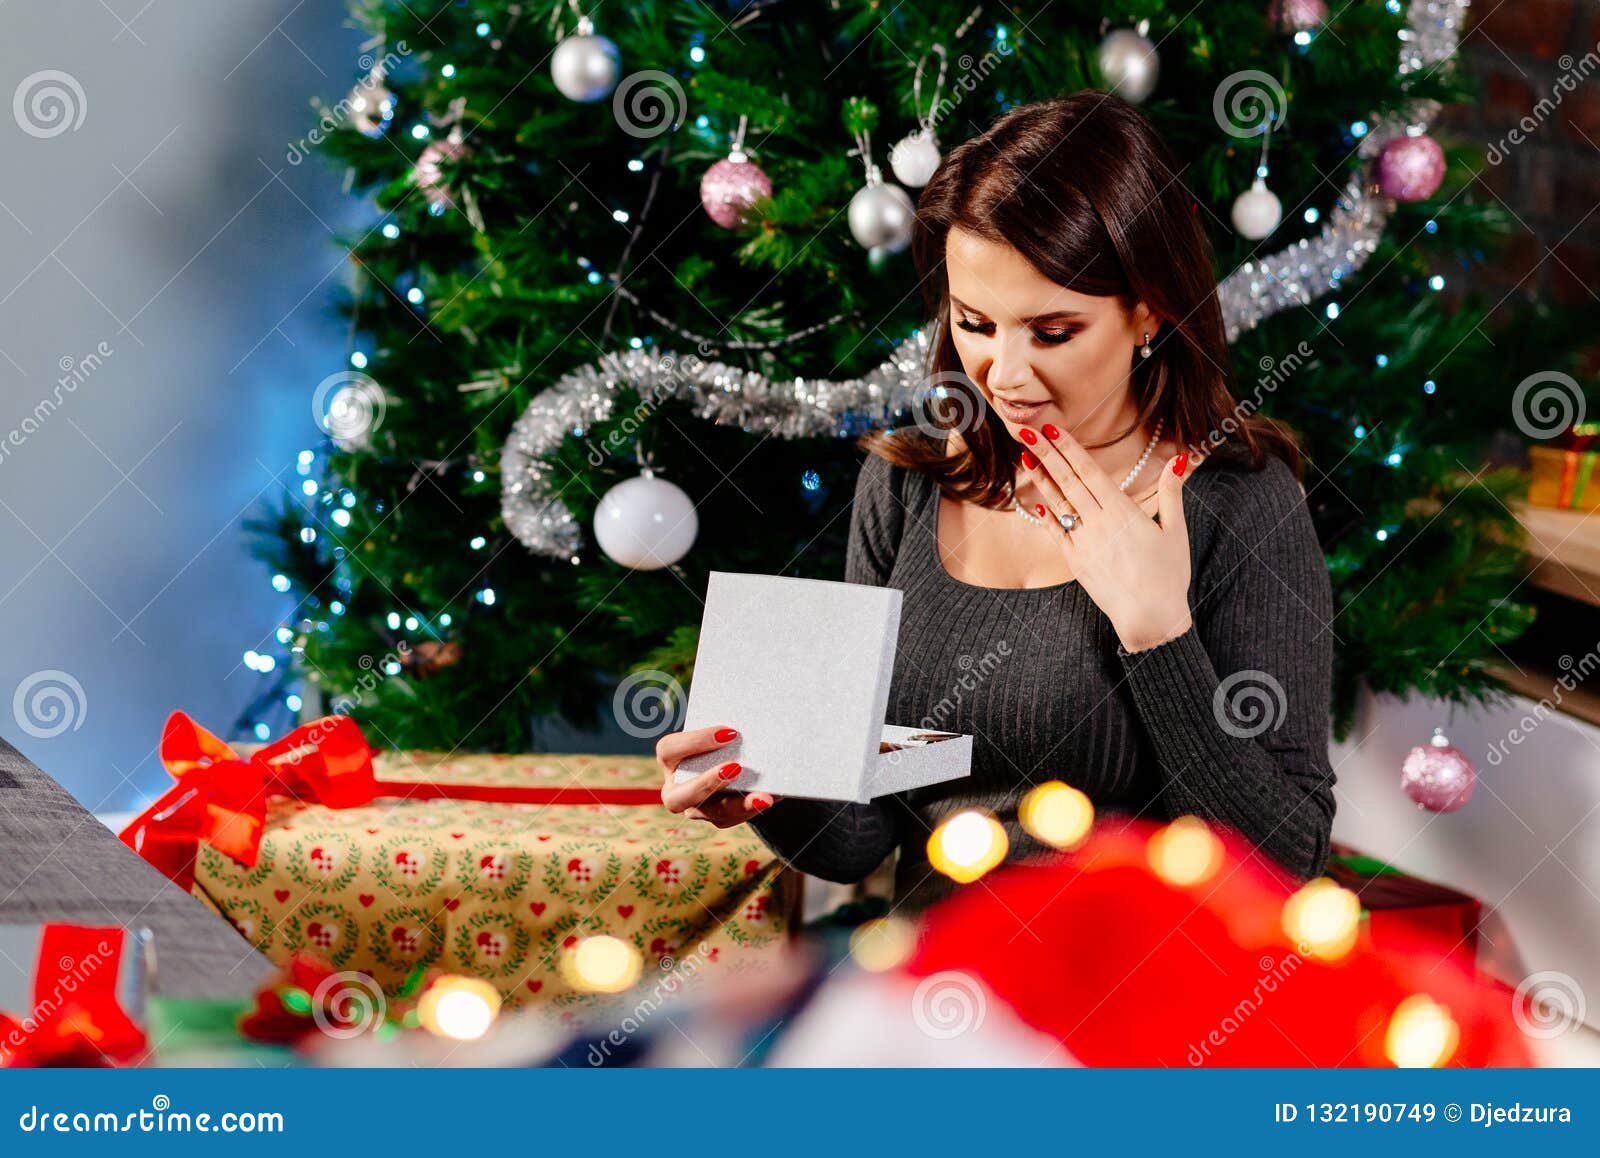 Excited Happy Woman Opening Gift Box With Jewelry Stock ...